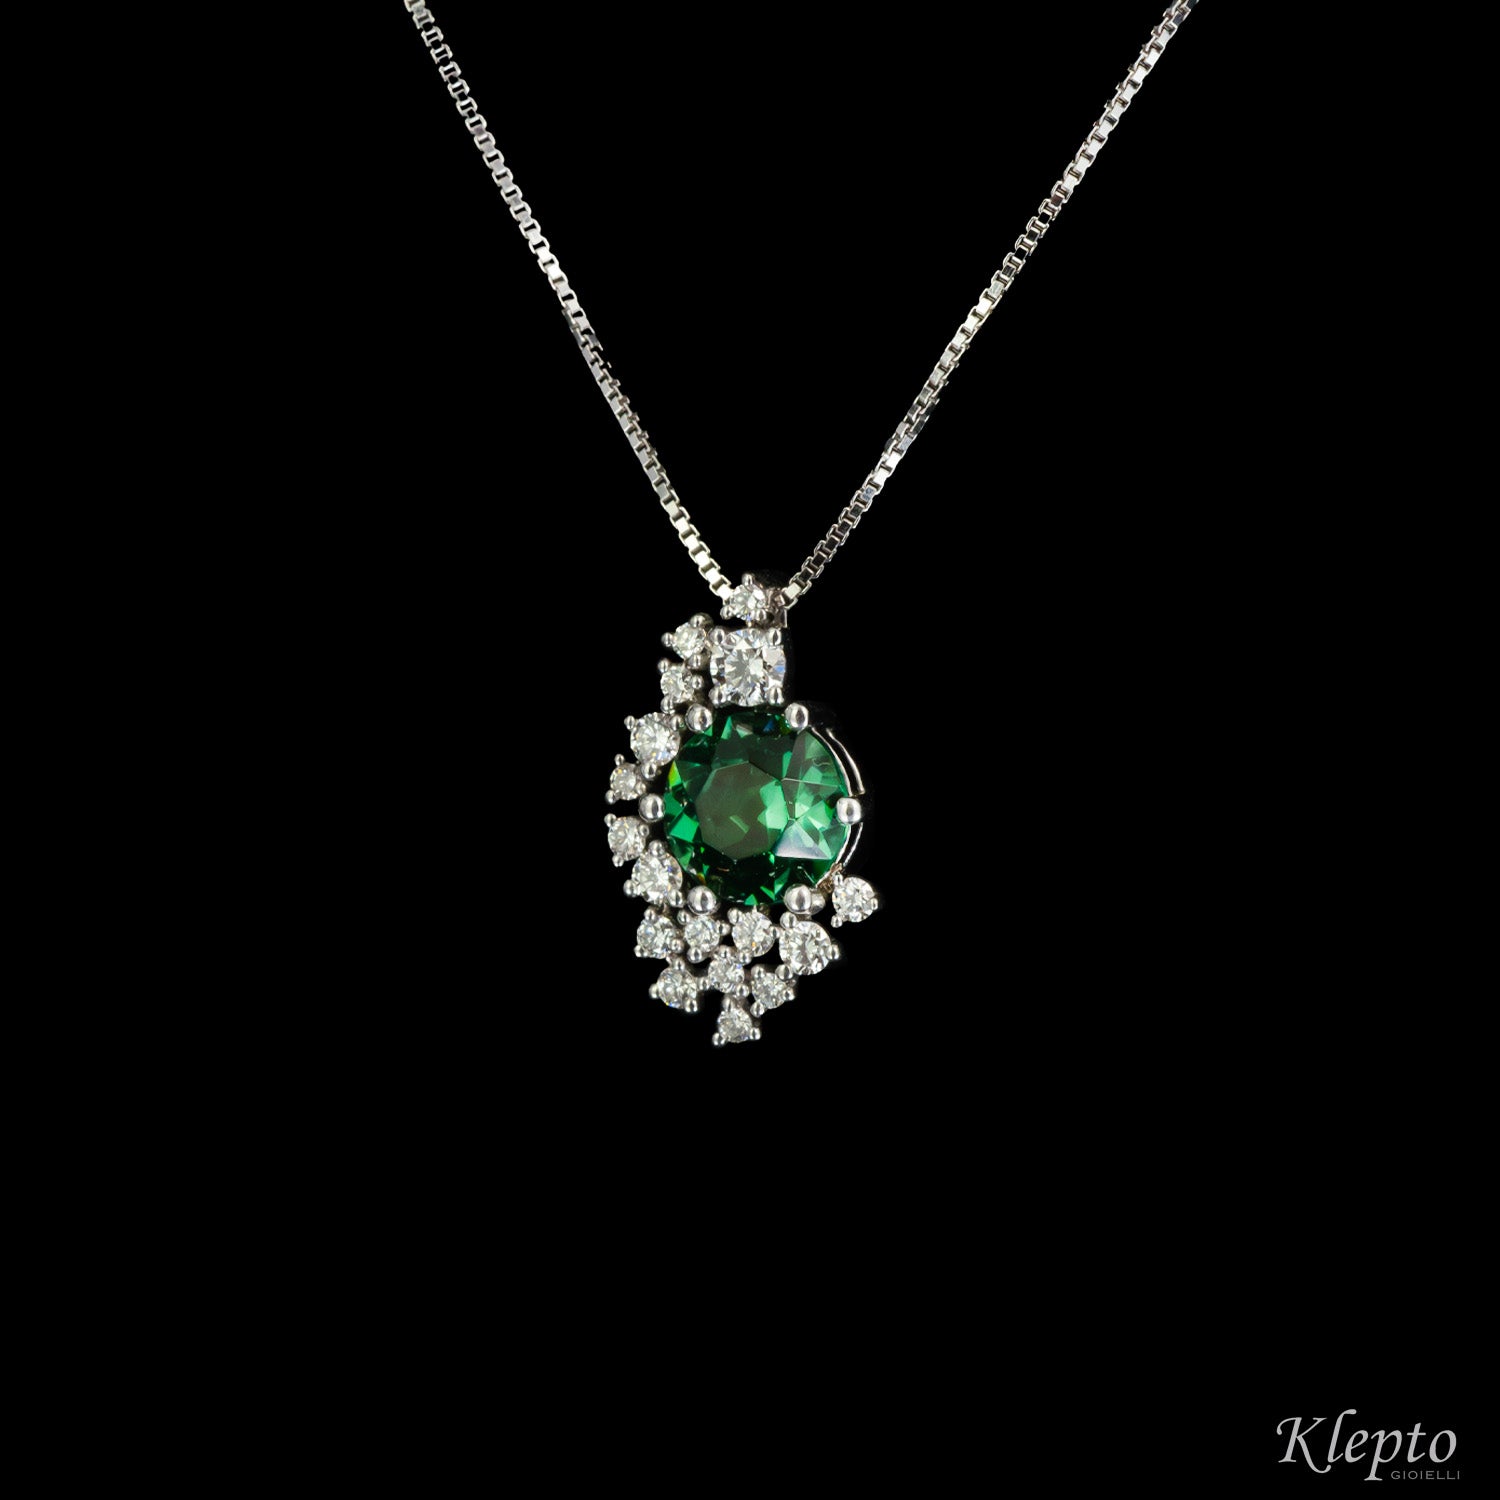 White gold pendant with green tourmaline and diamonds